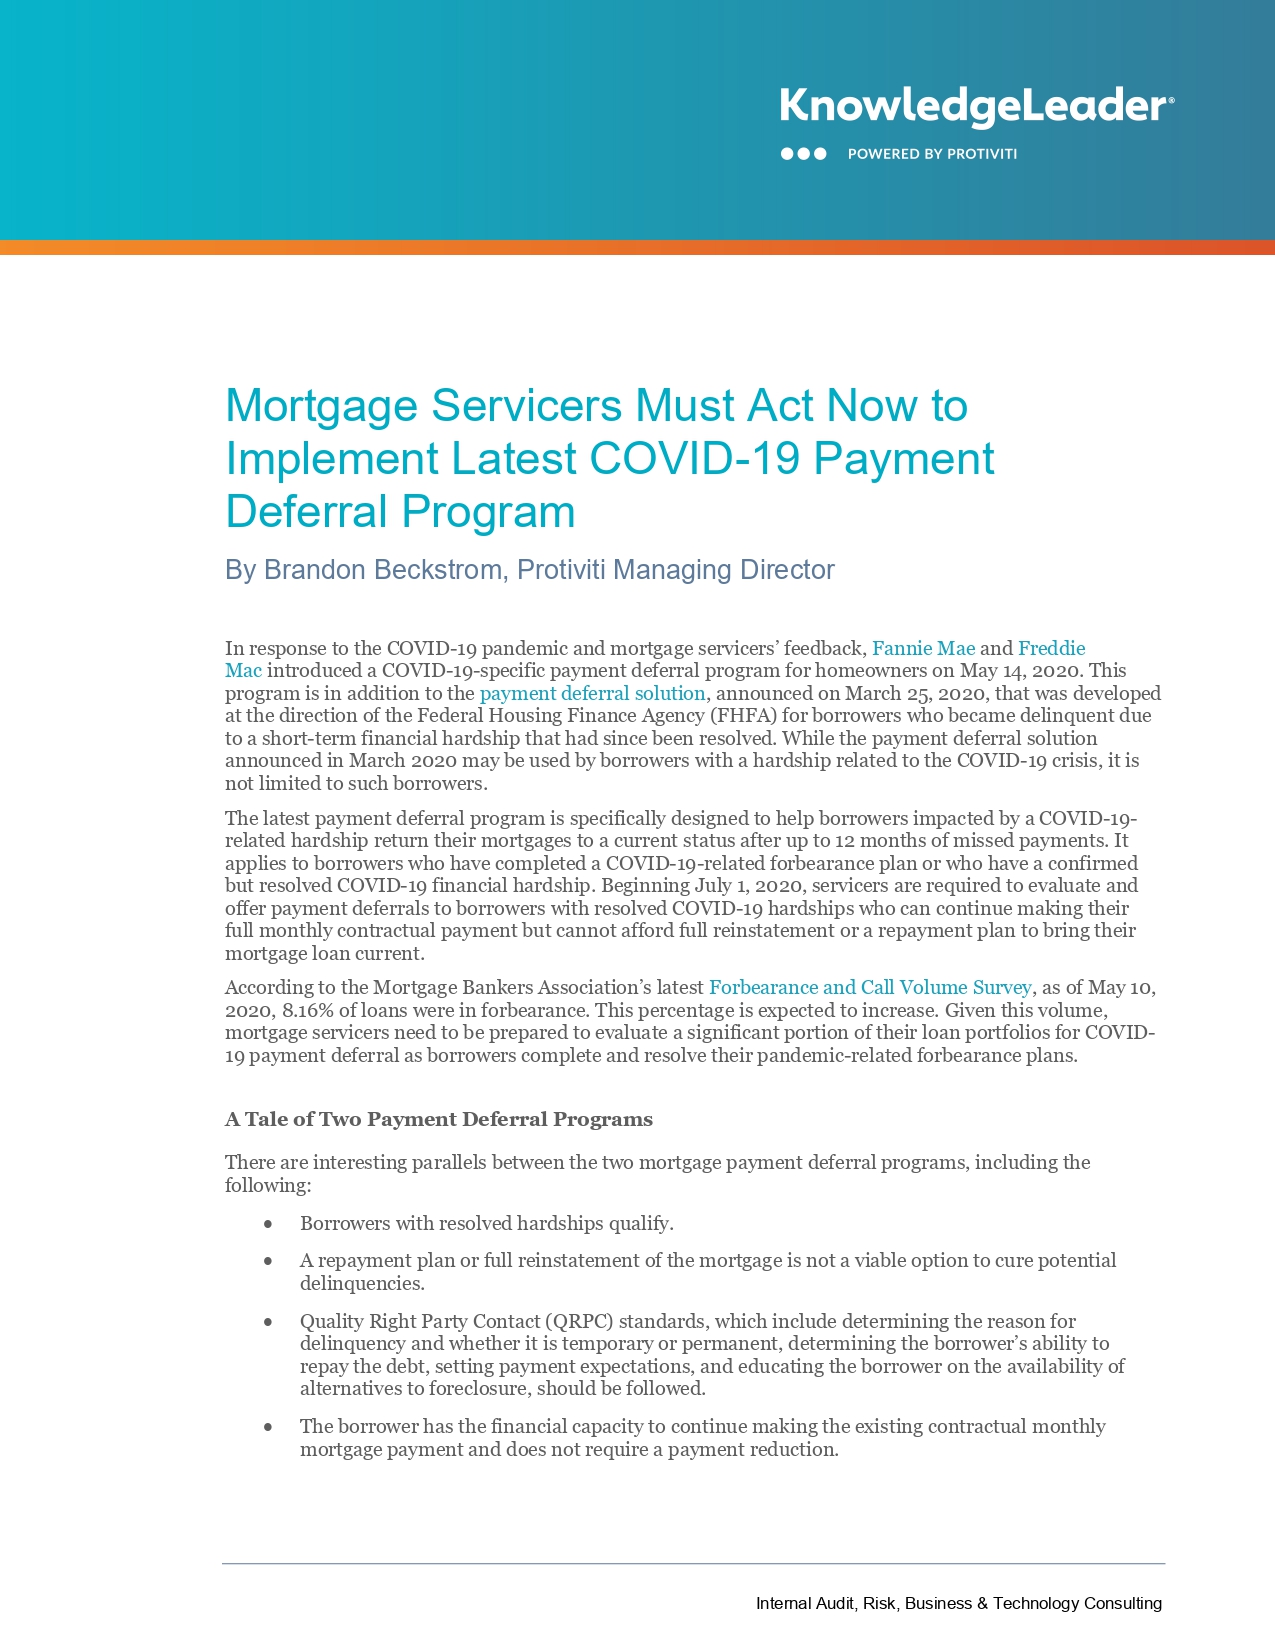 Screenshot of Mortgage Servicers Must Act Now to Implement Latest COVID-19 Payment Deferral